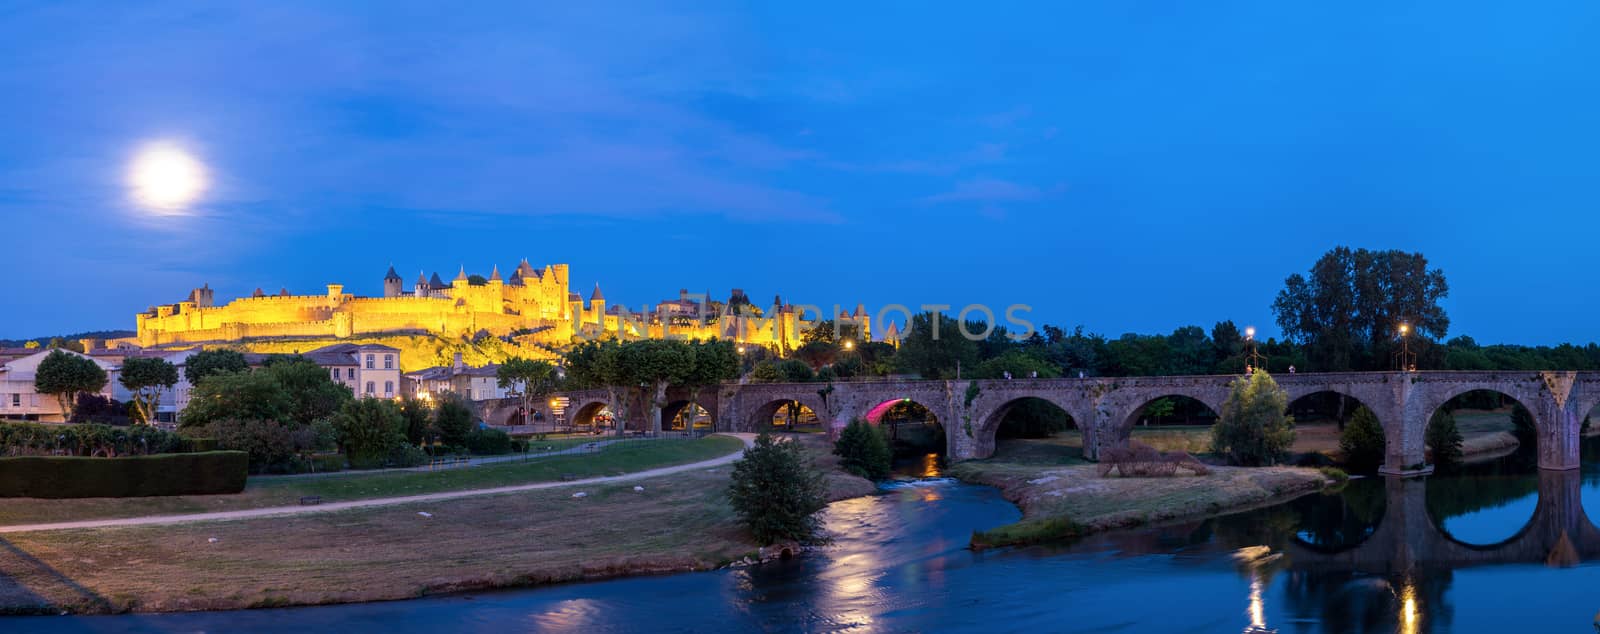 Carcassonne France by vichie81